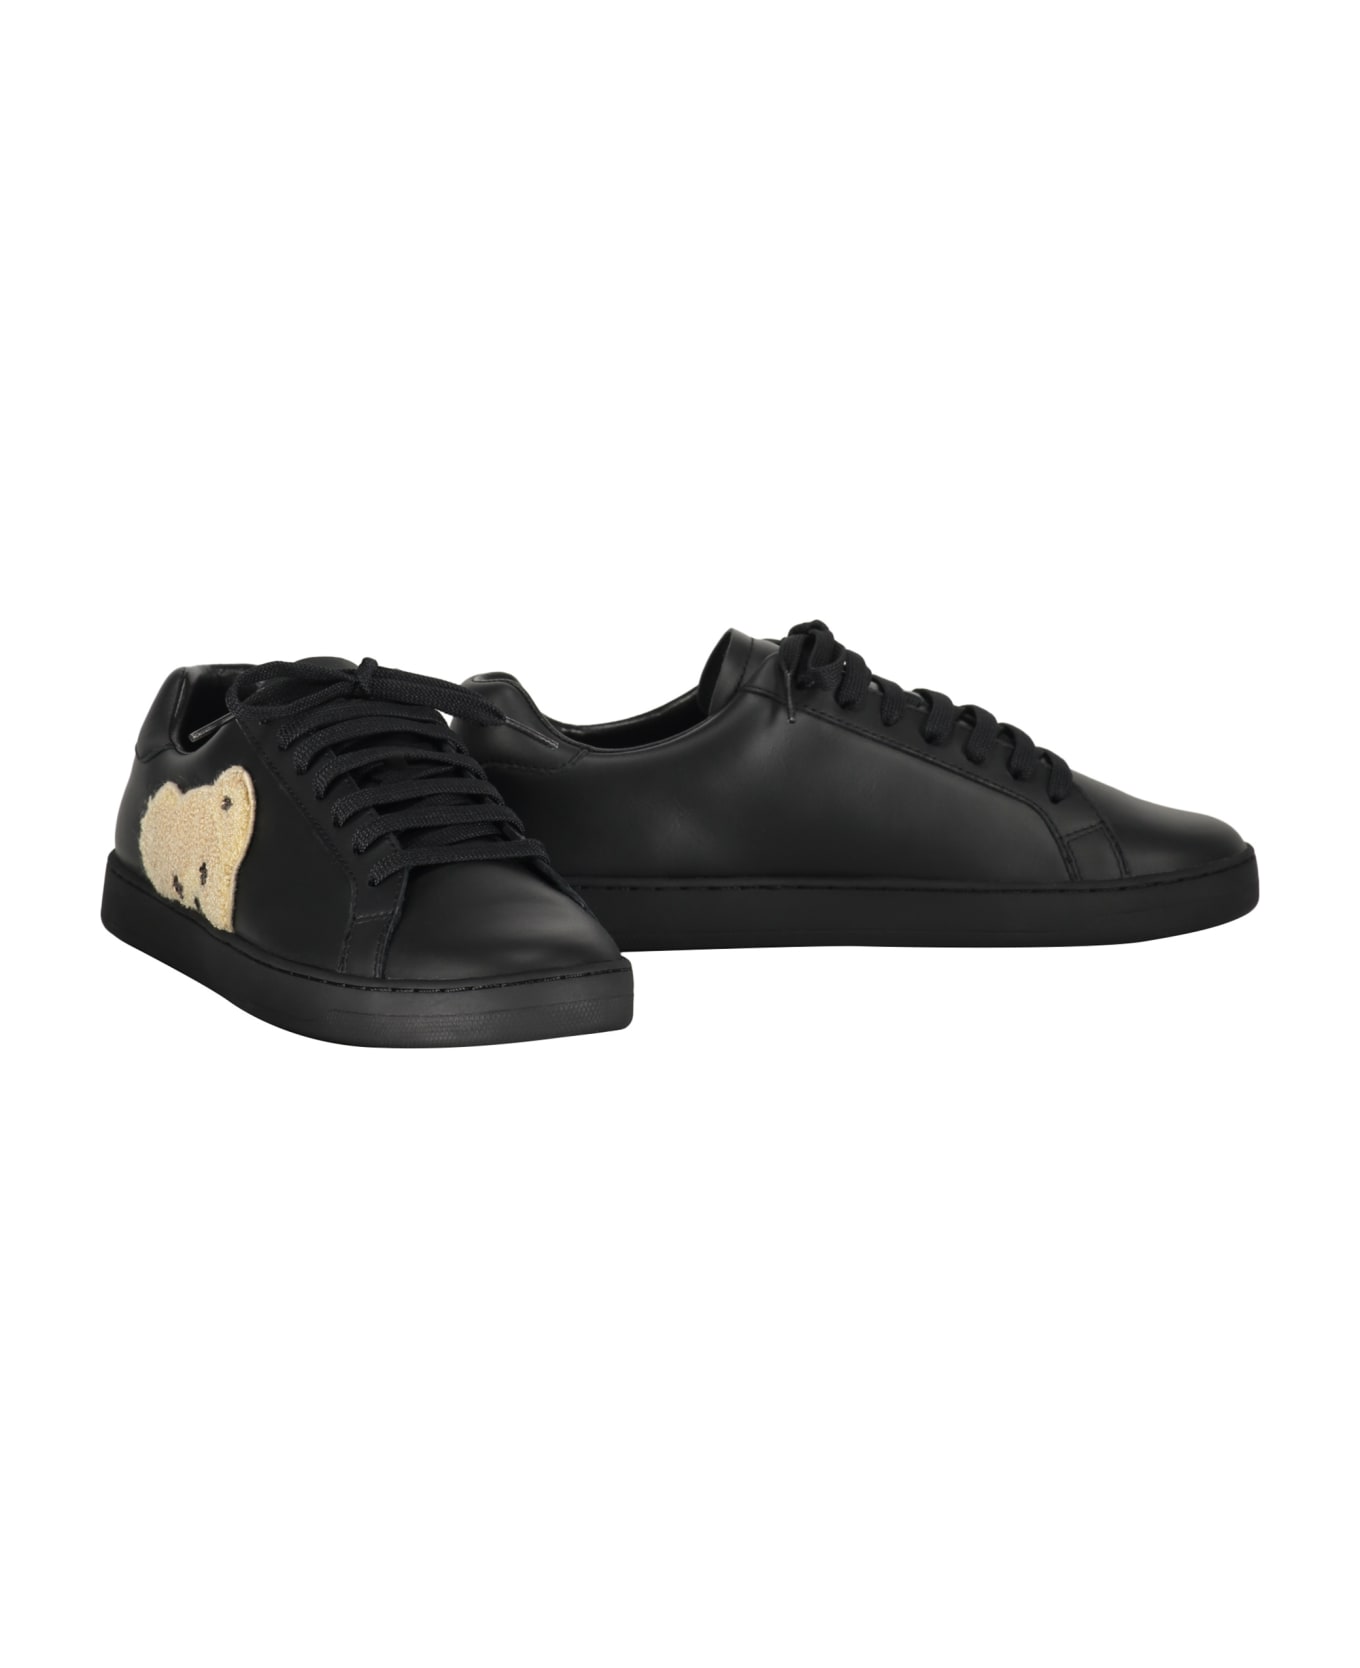 Palm Angels New Teddy Bear Leather Low-top Sneakers - black